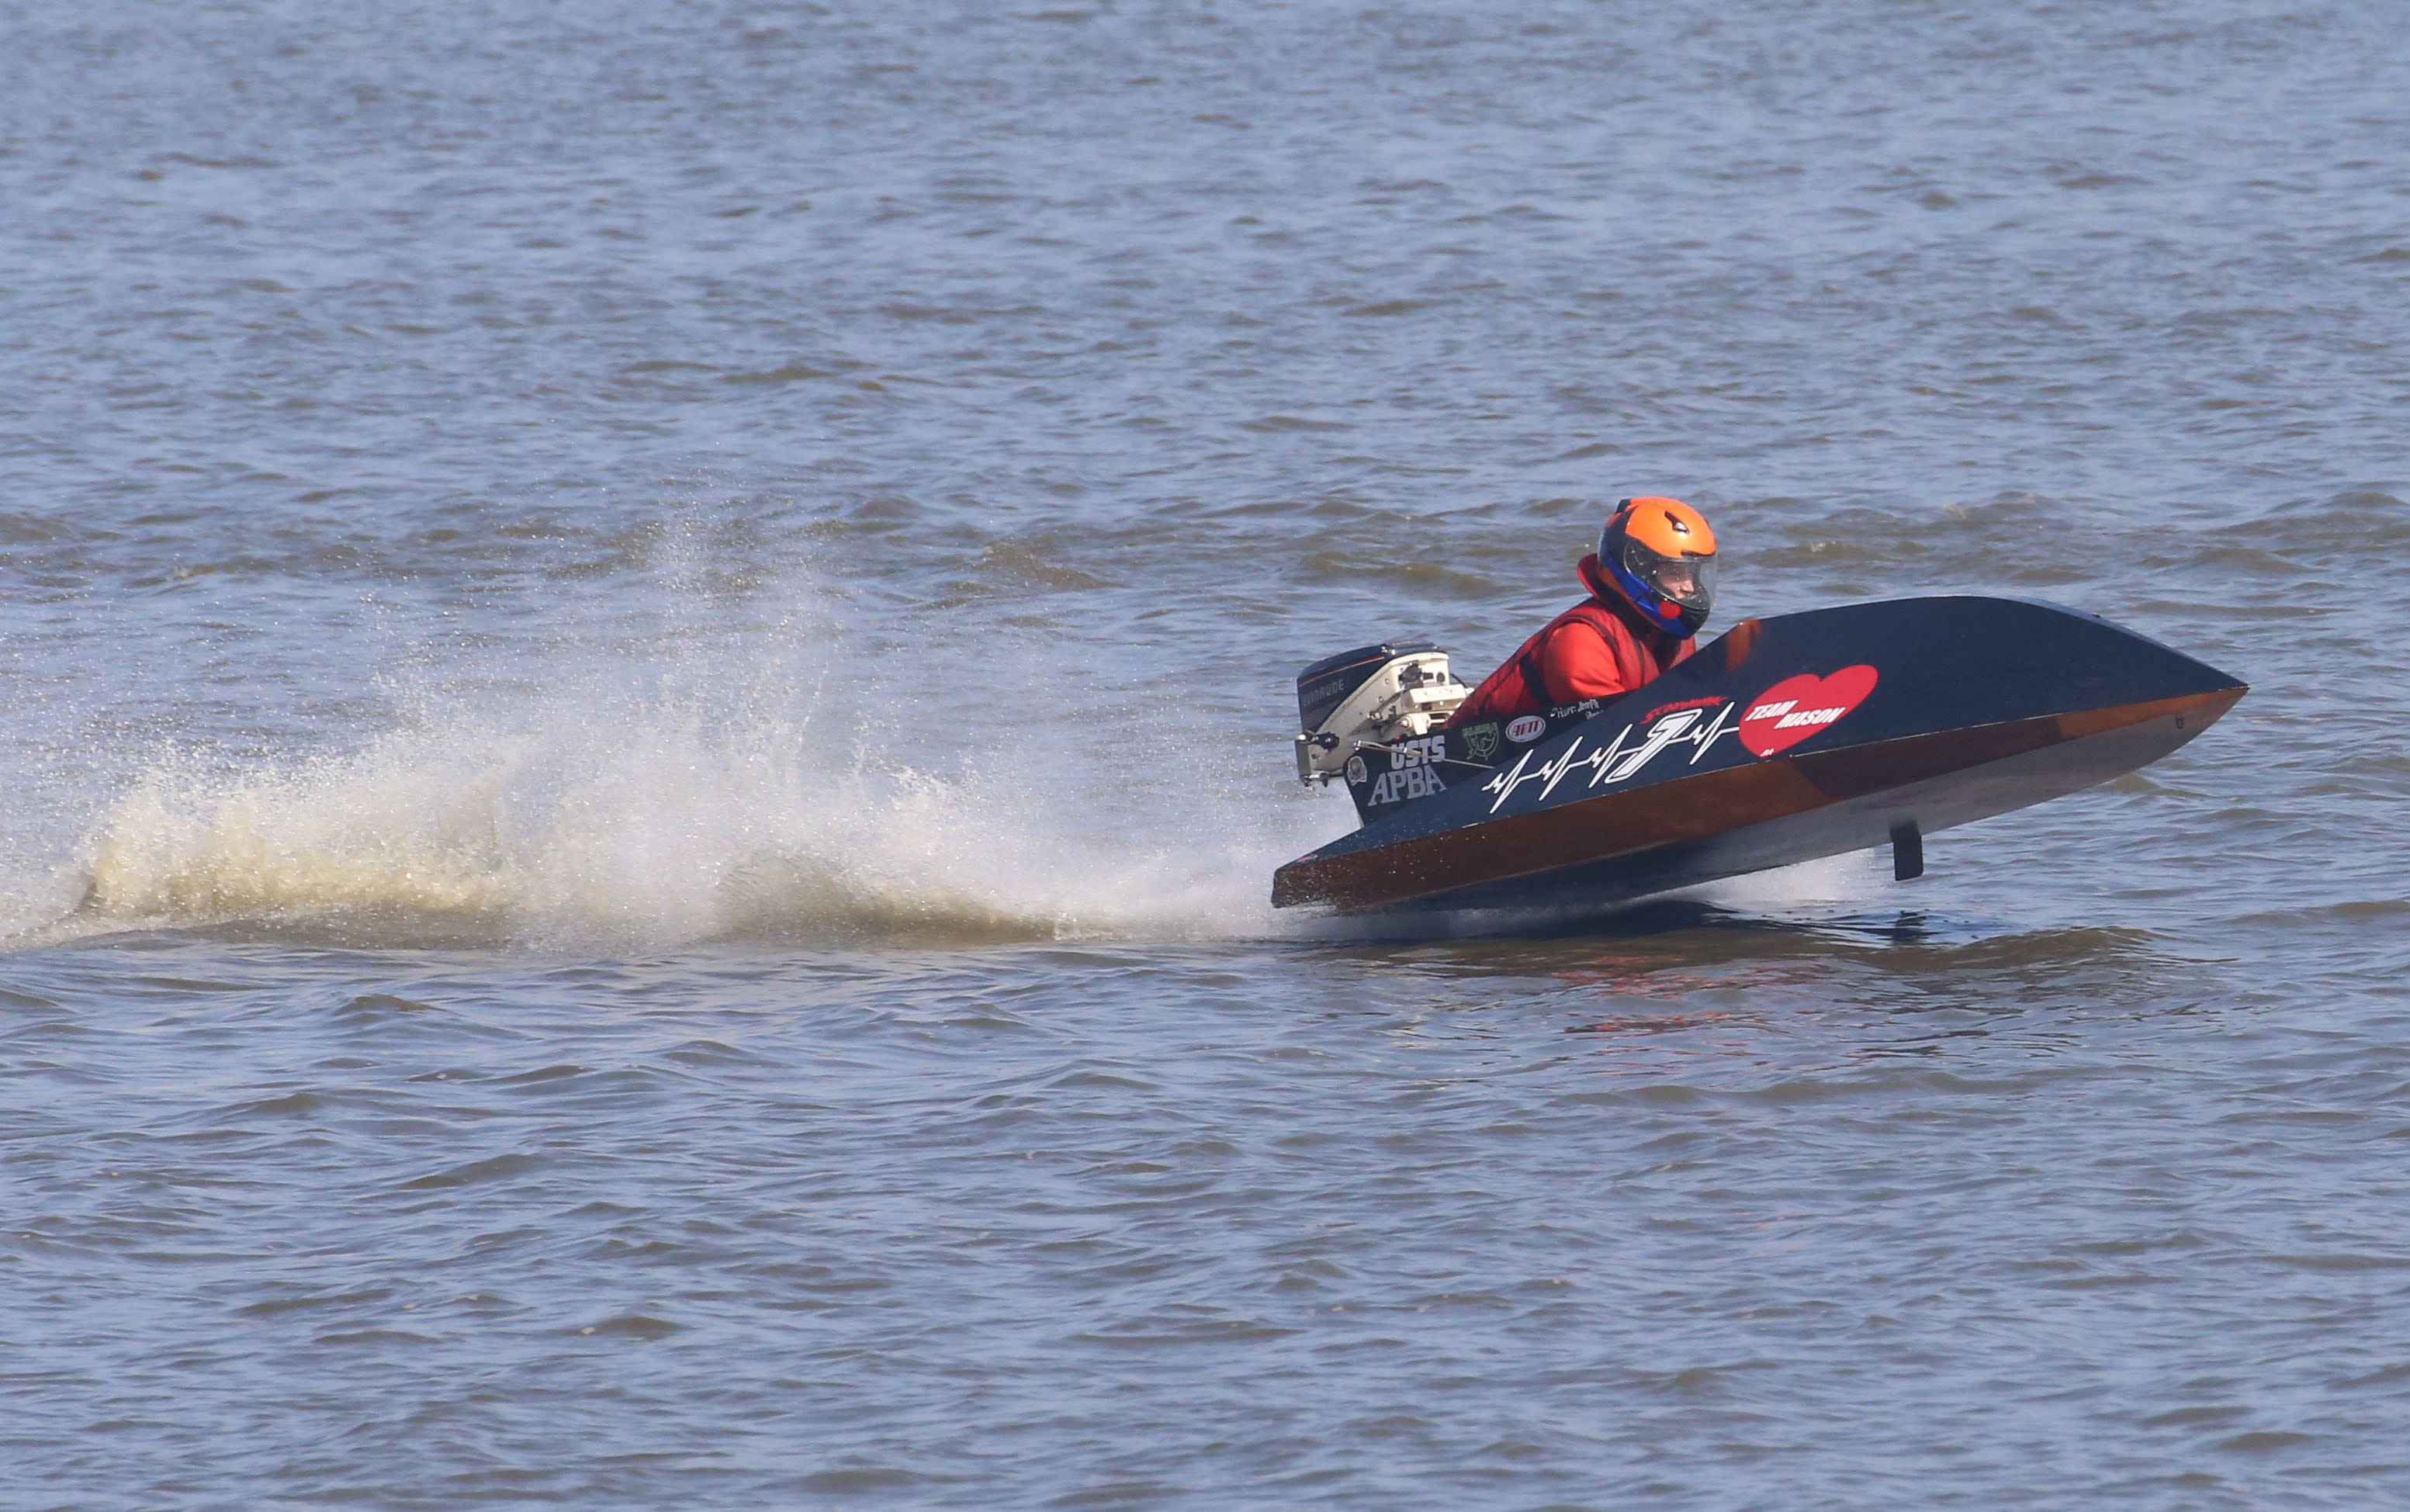 ‘Every class is wide open’ at DePue boat races 